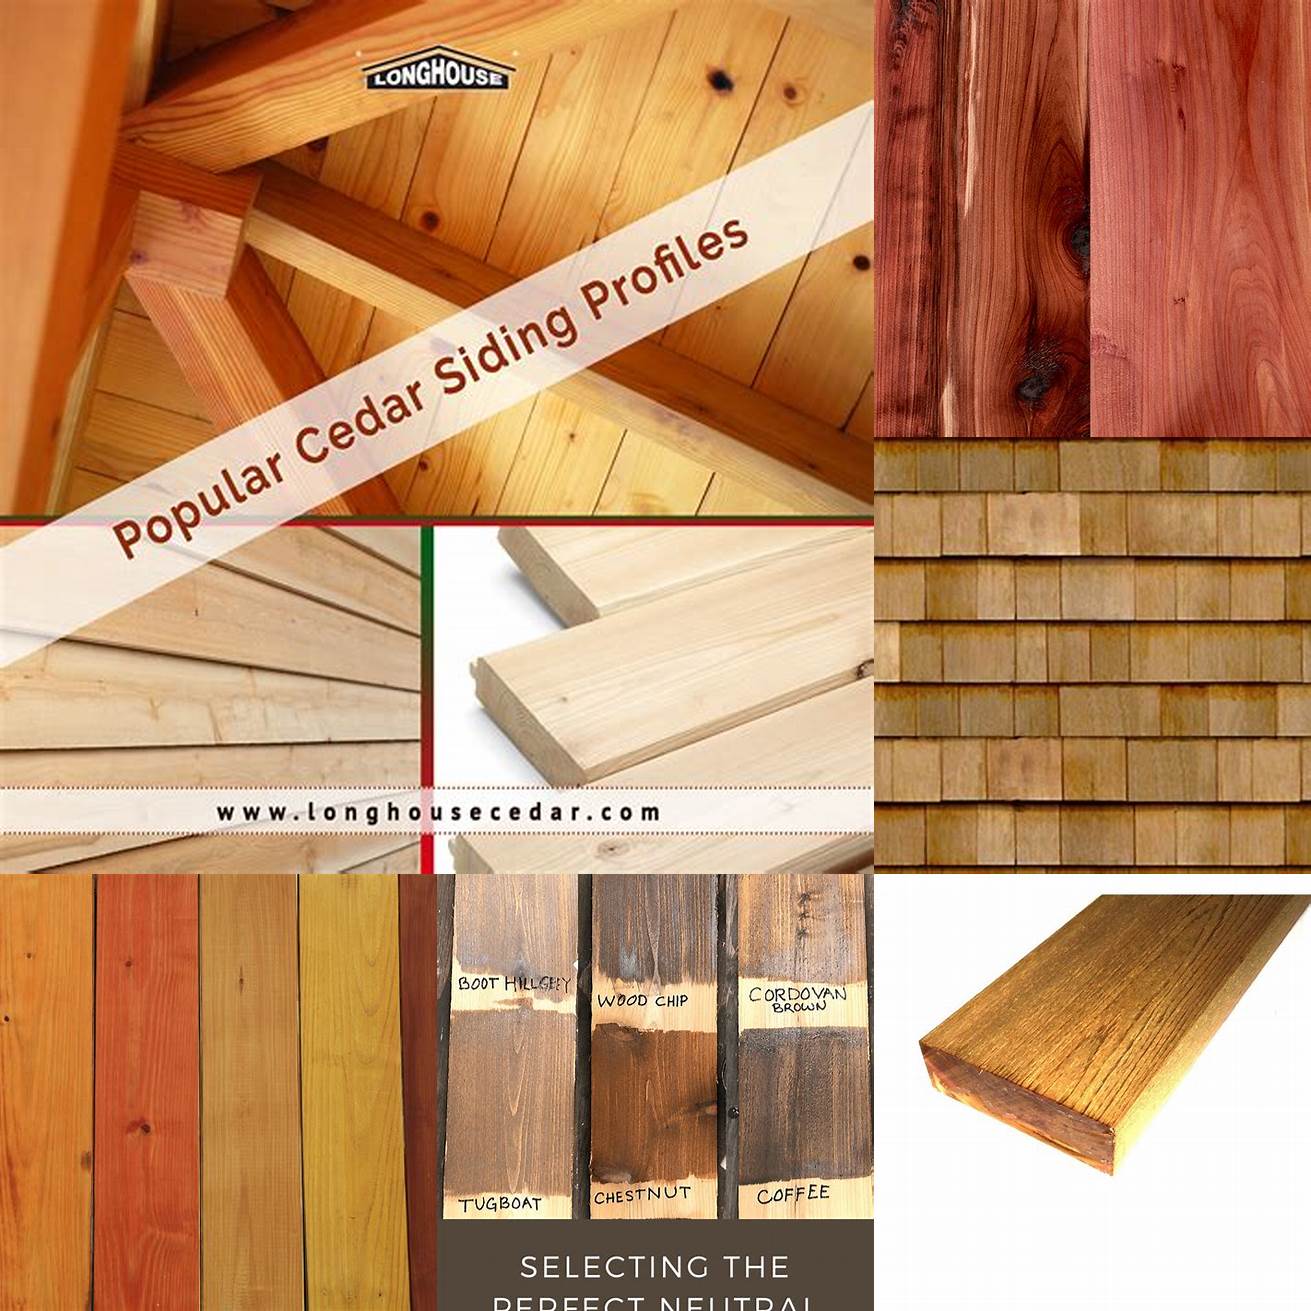 Cedar Cedar is a popular choice for its natural resistance to moisture and insects It also has a warm reddish-brown color that can add warmth to a bathroom